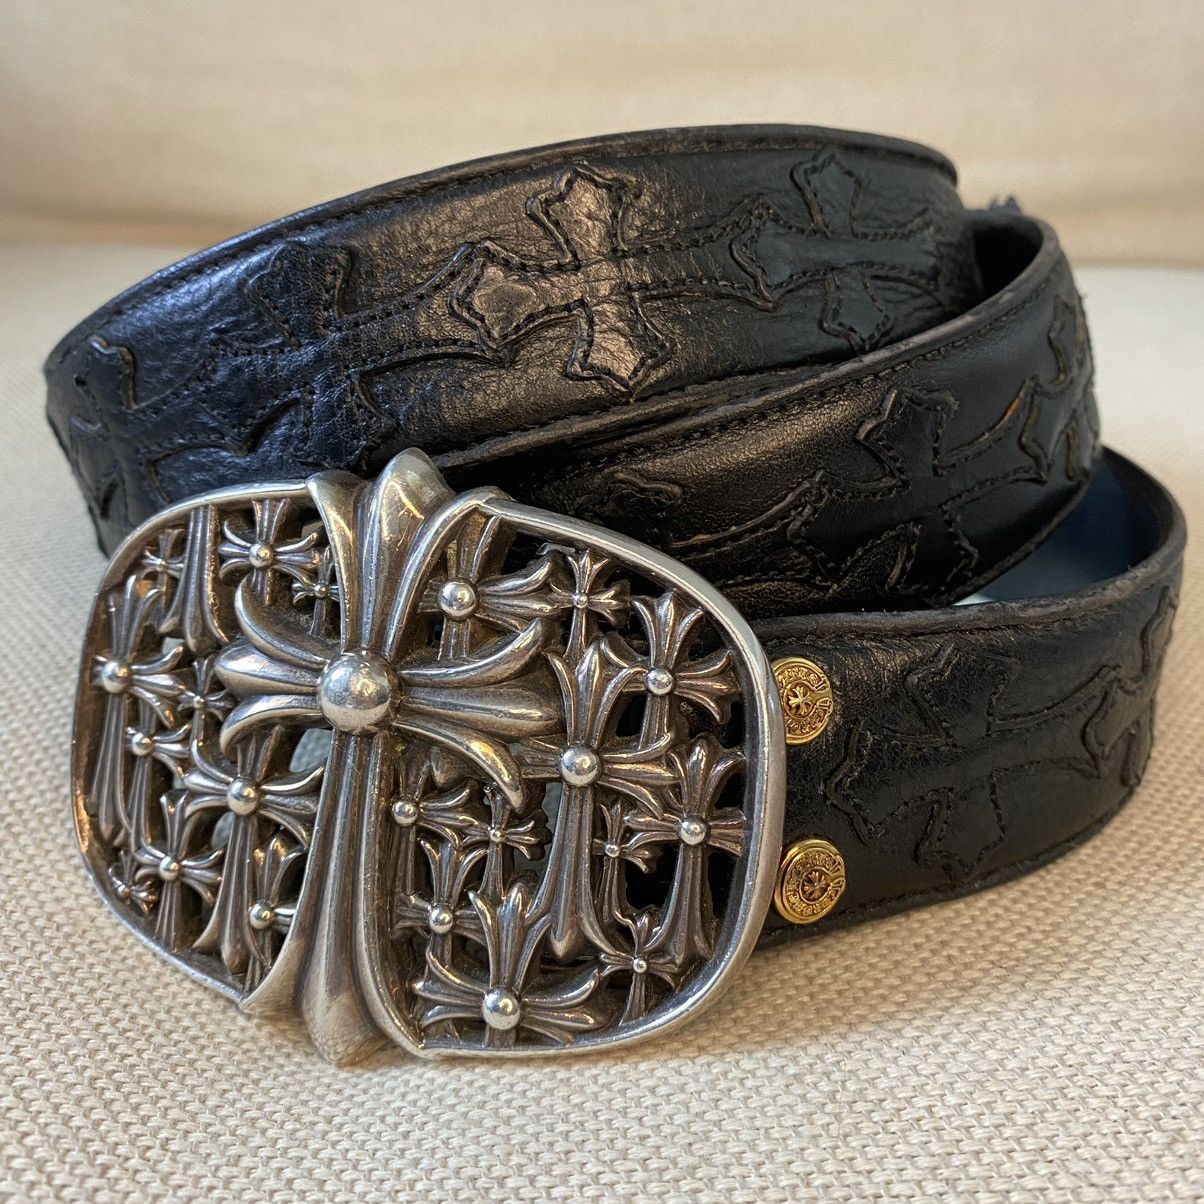 Pre-owned Chrome Hearts 22k Snap Destroyer Cemetery Belt In Black